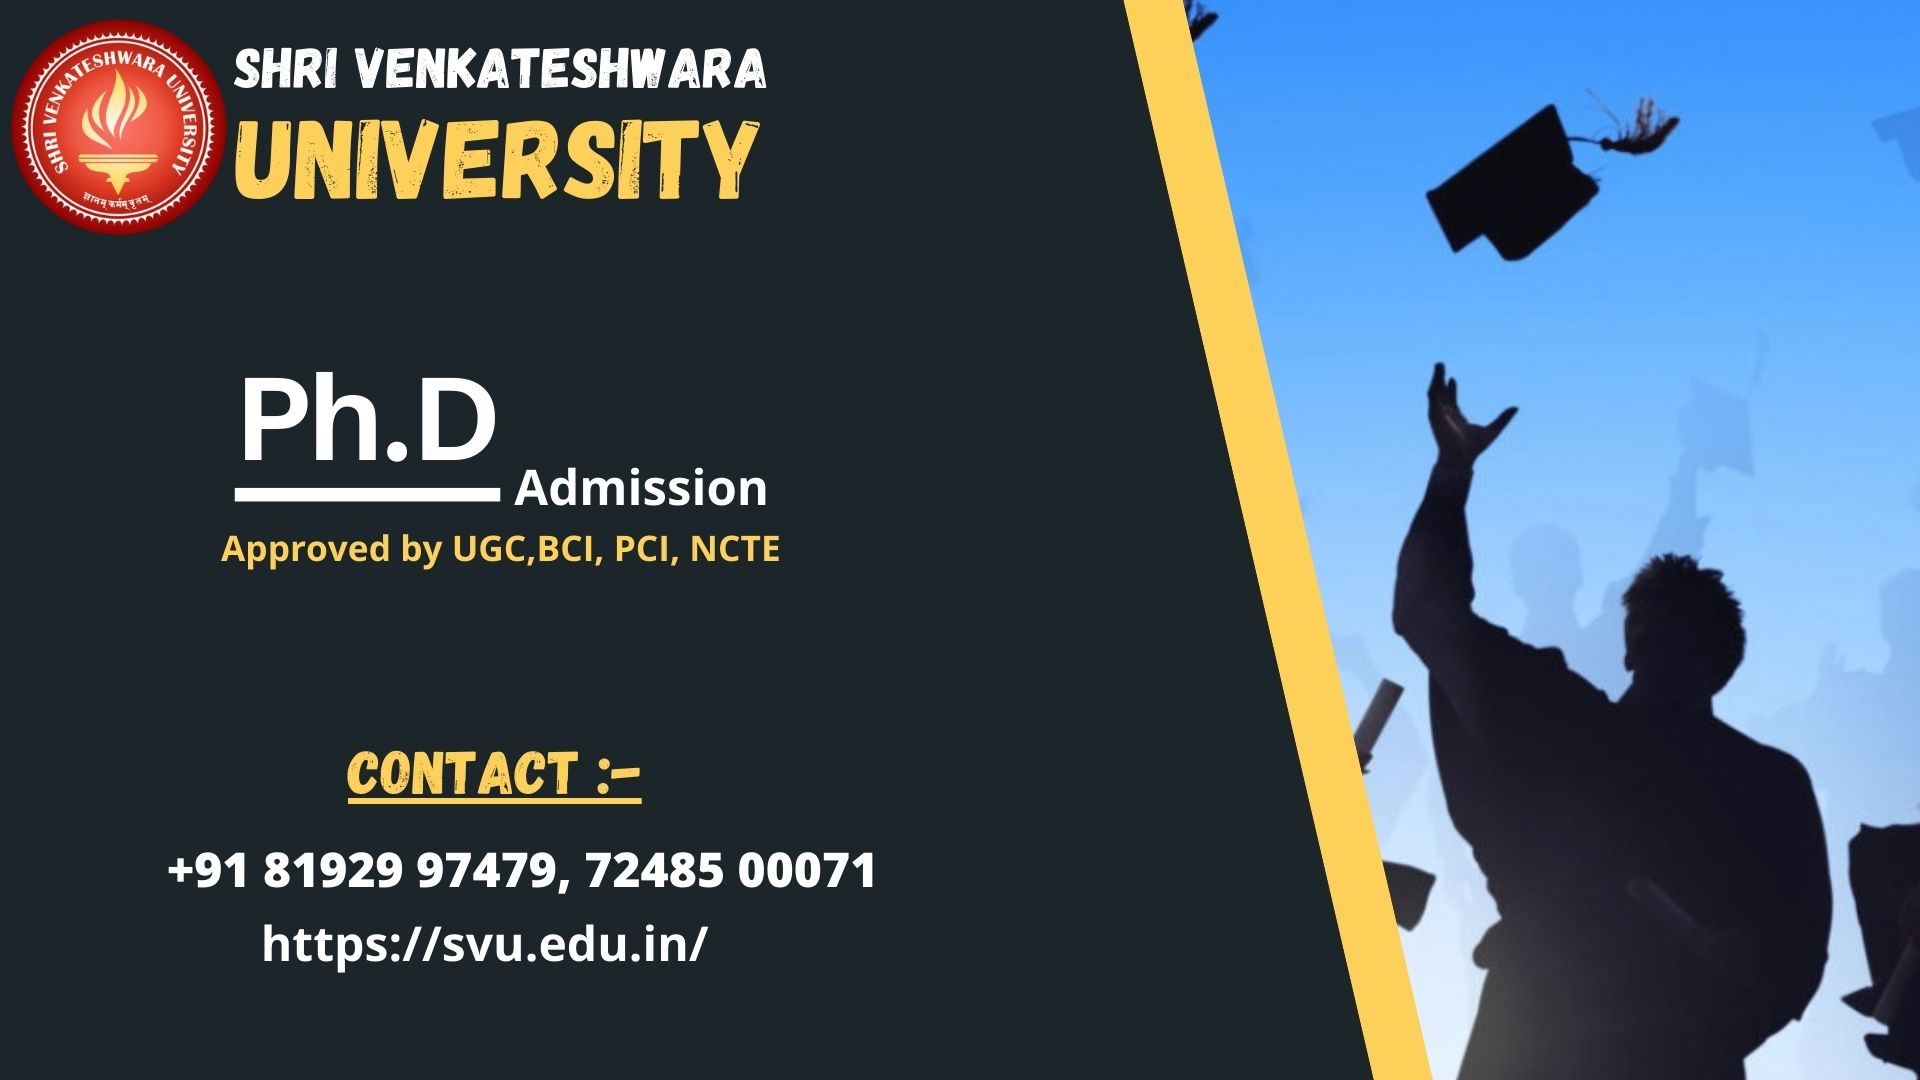 Top/Best Ph.D University/Colleges in Moradabad UP, Delhi NCR, India